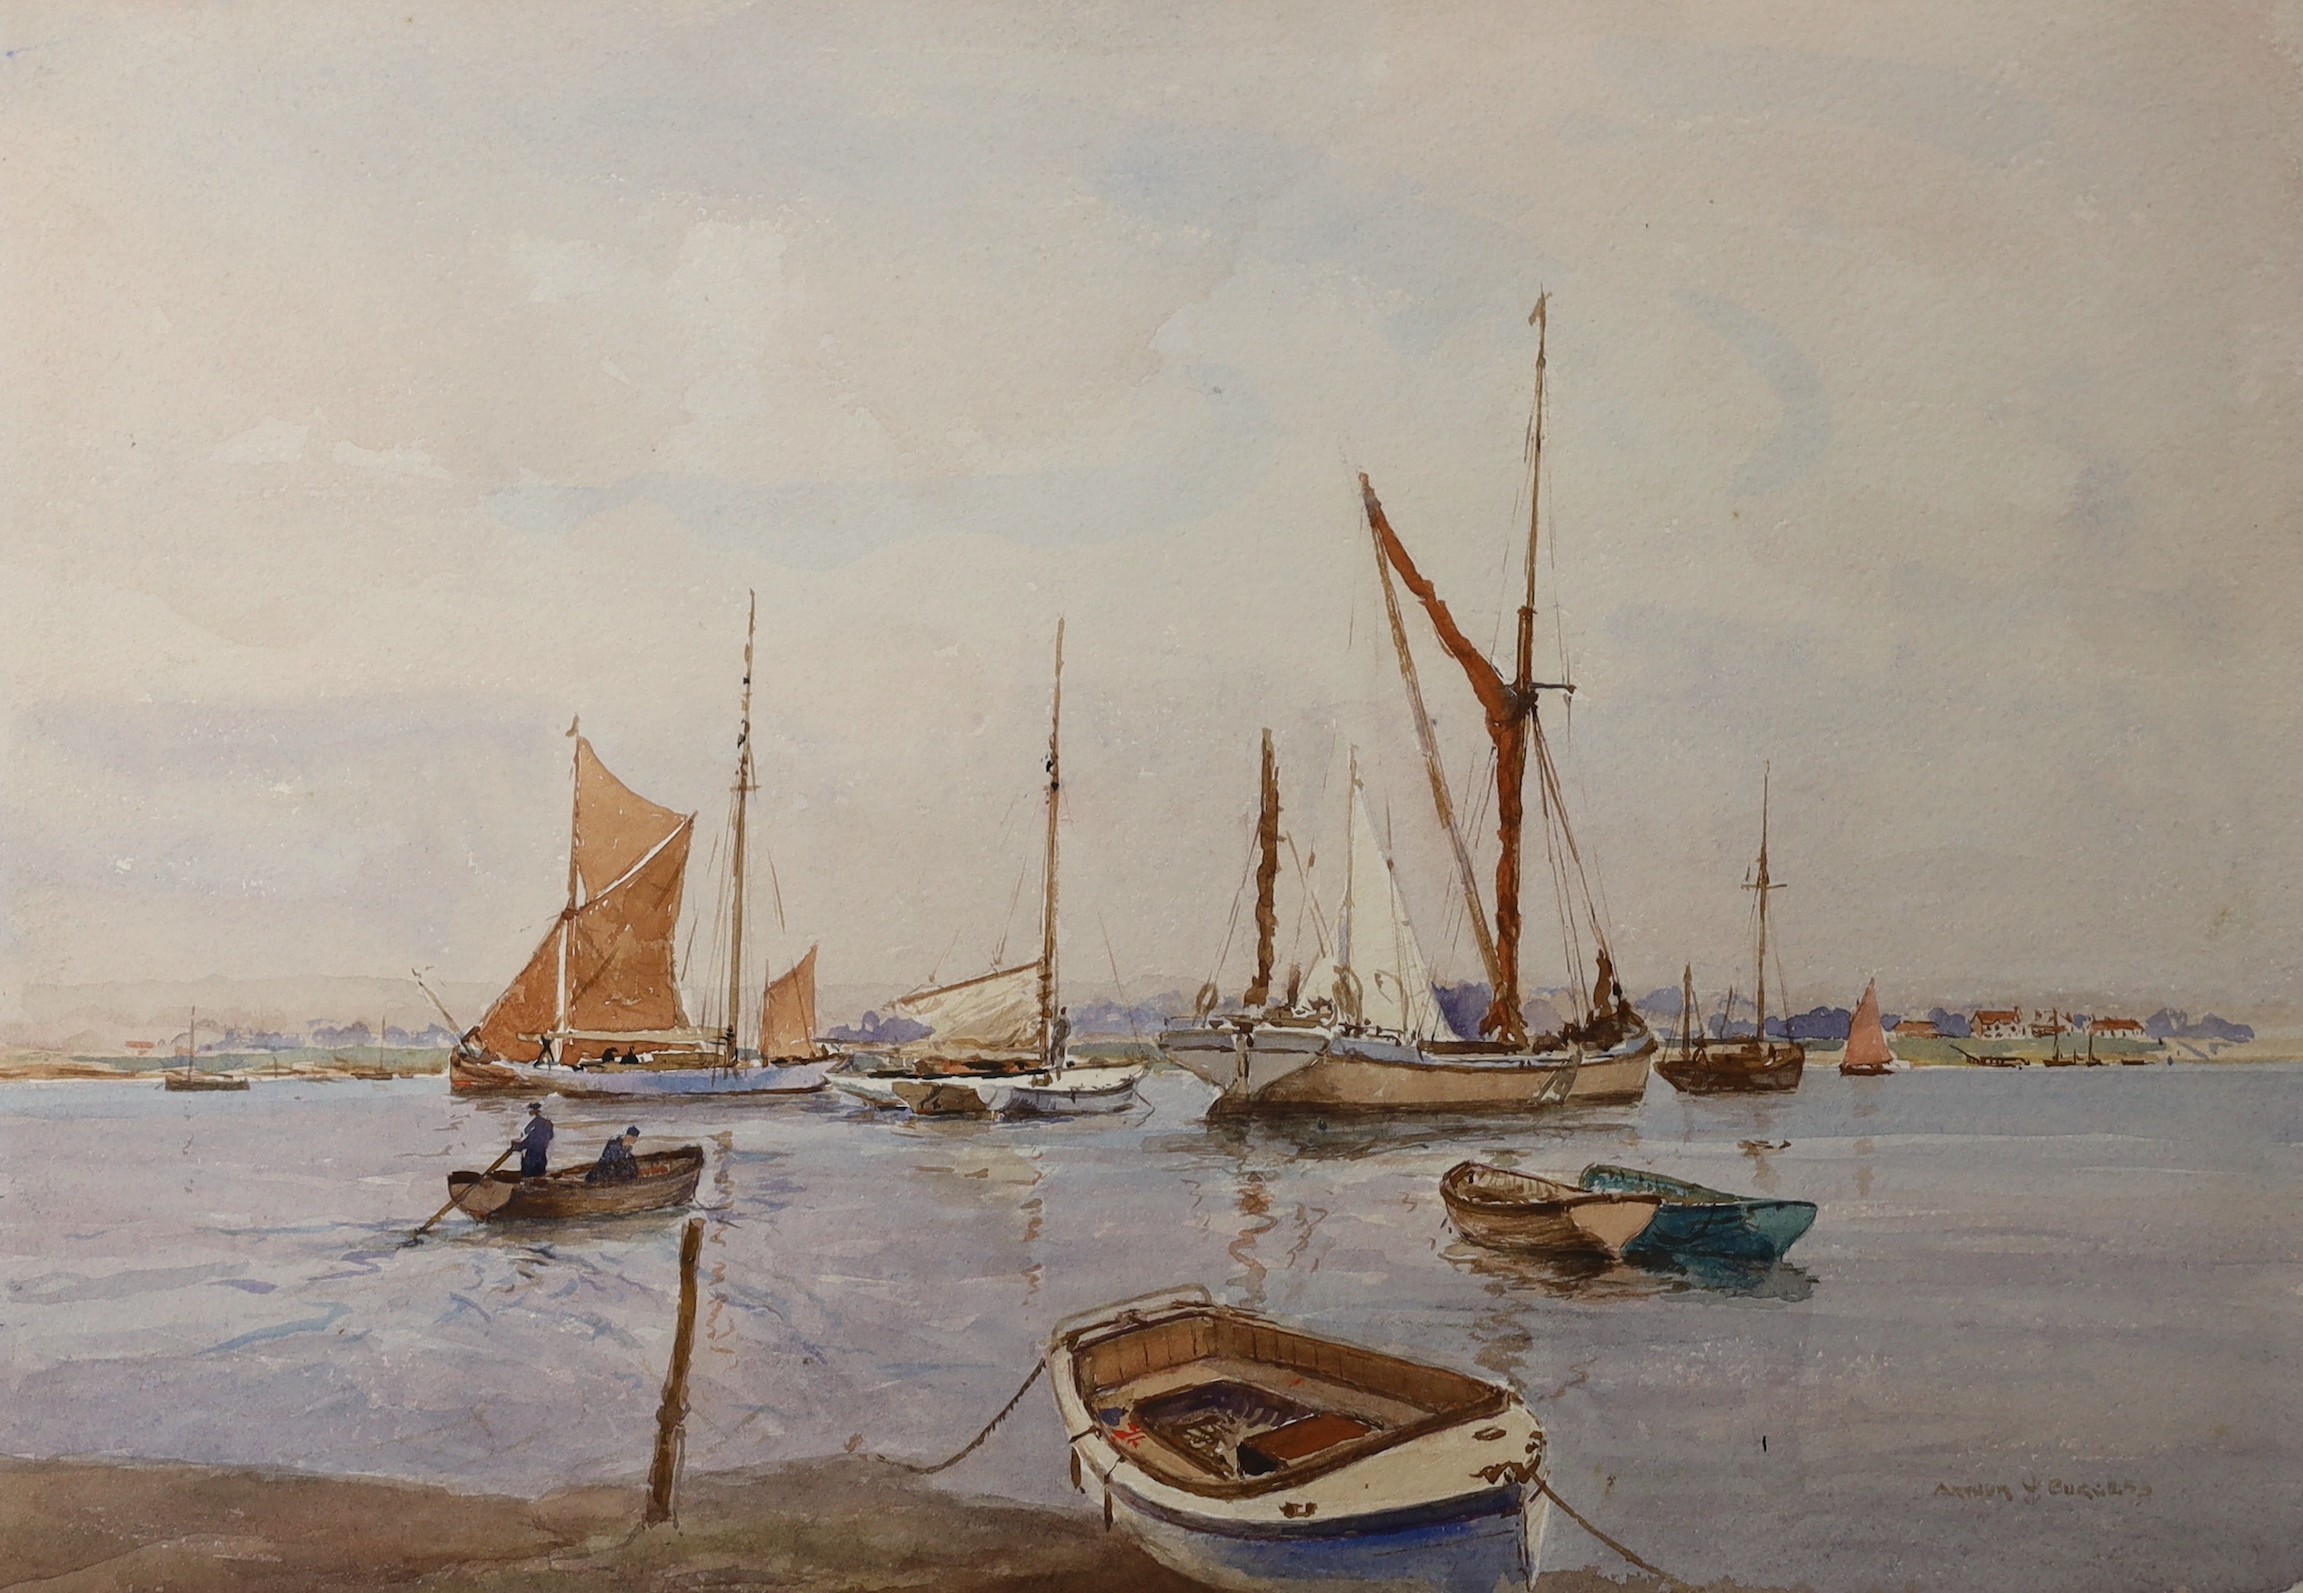 Arthur Burgess RI, ROI (1859-1957) , watercolour, 'Weekend Afloat' and 'Monday A. Briscoe', signed and dated 1944, 27 x 38cm and 25 x 35cm, unframed